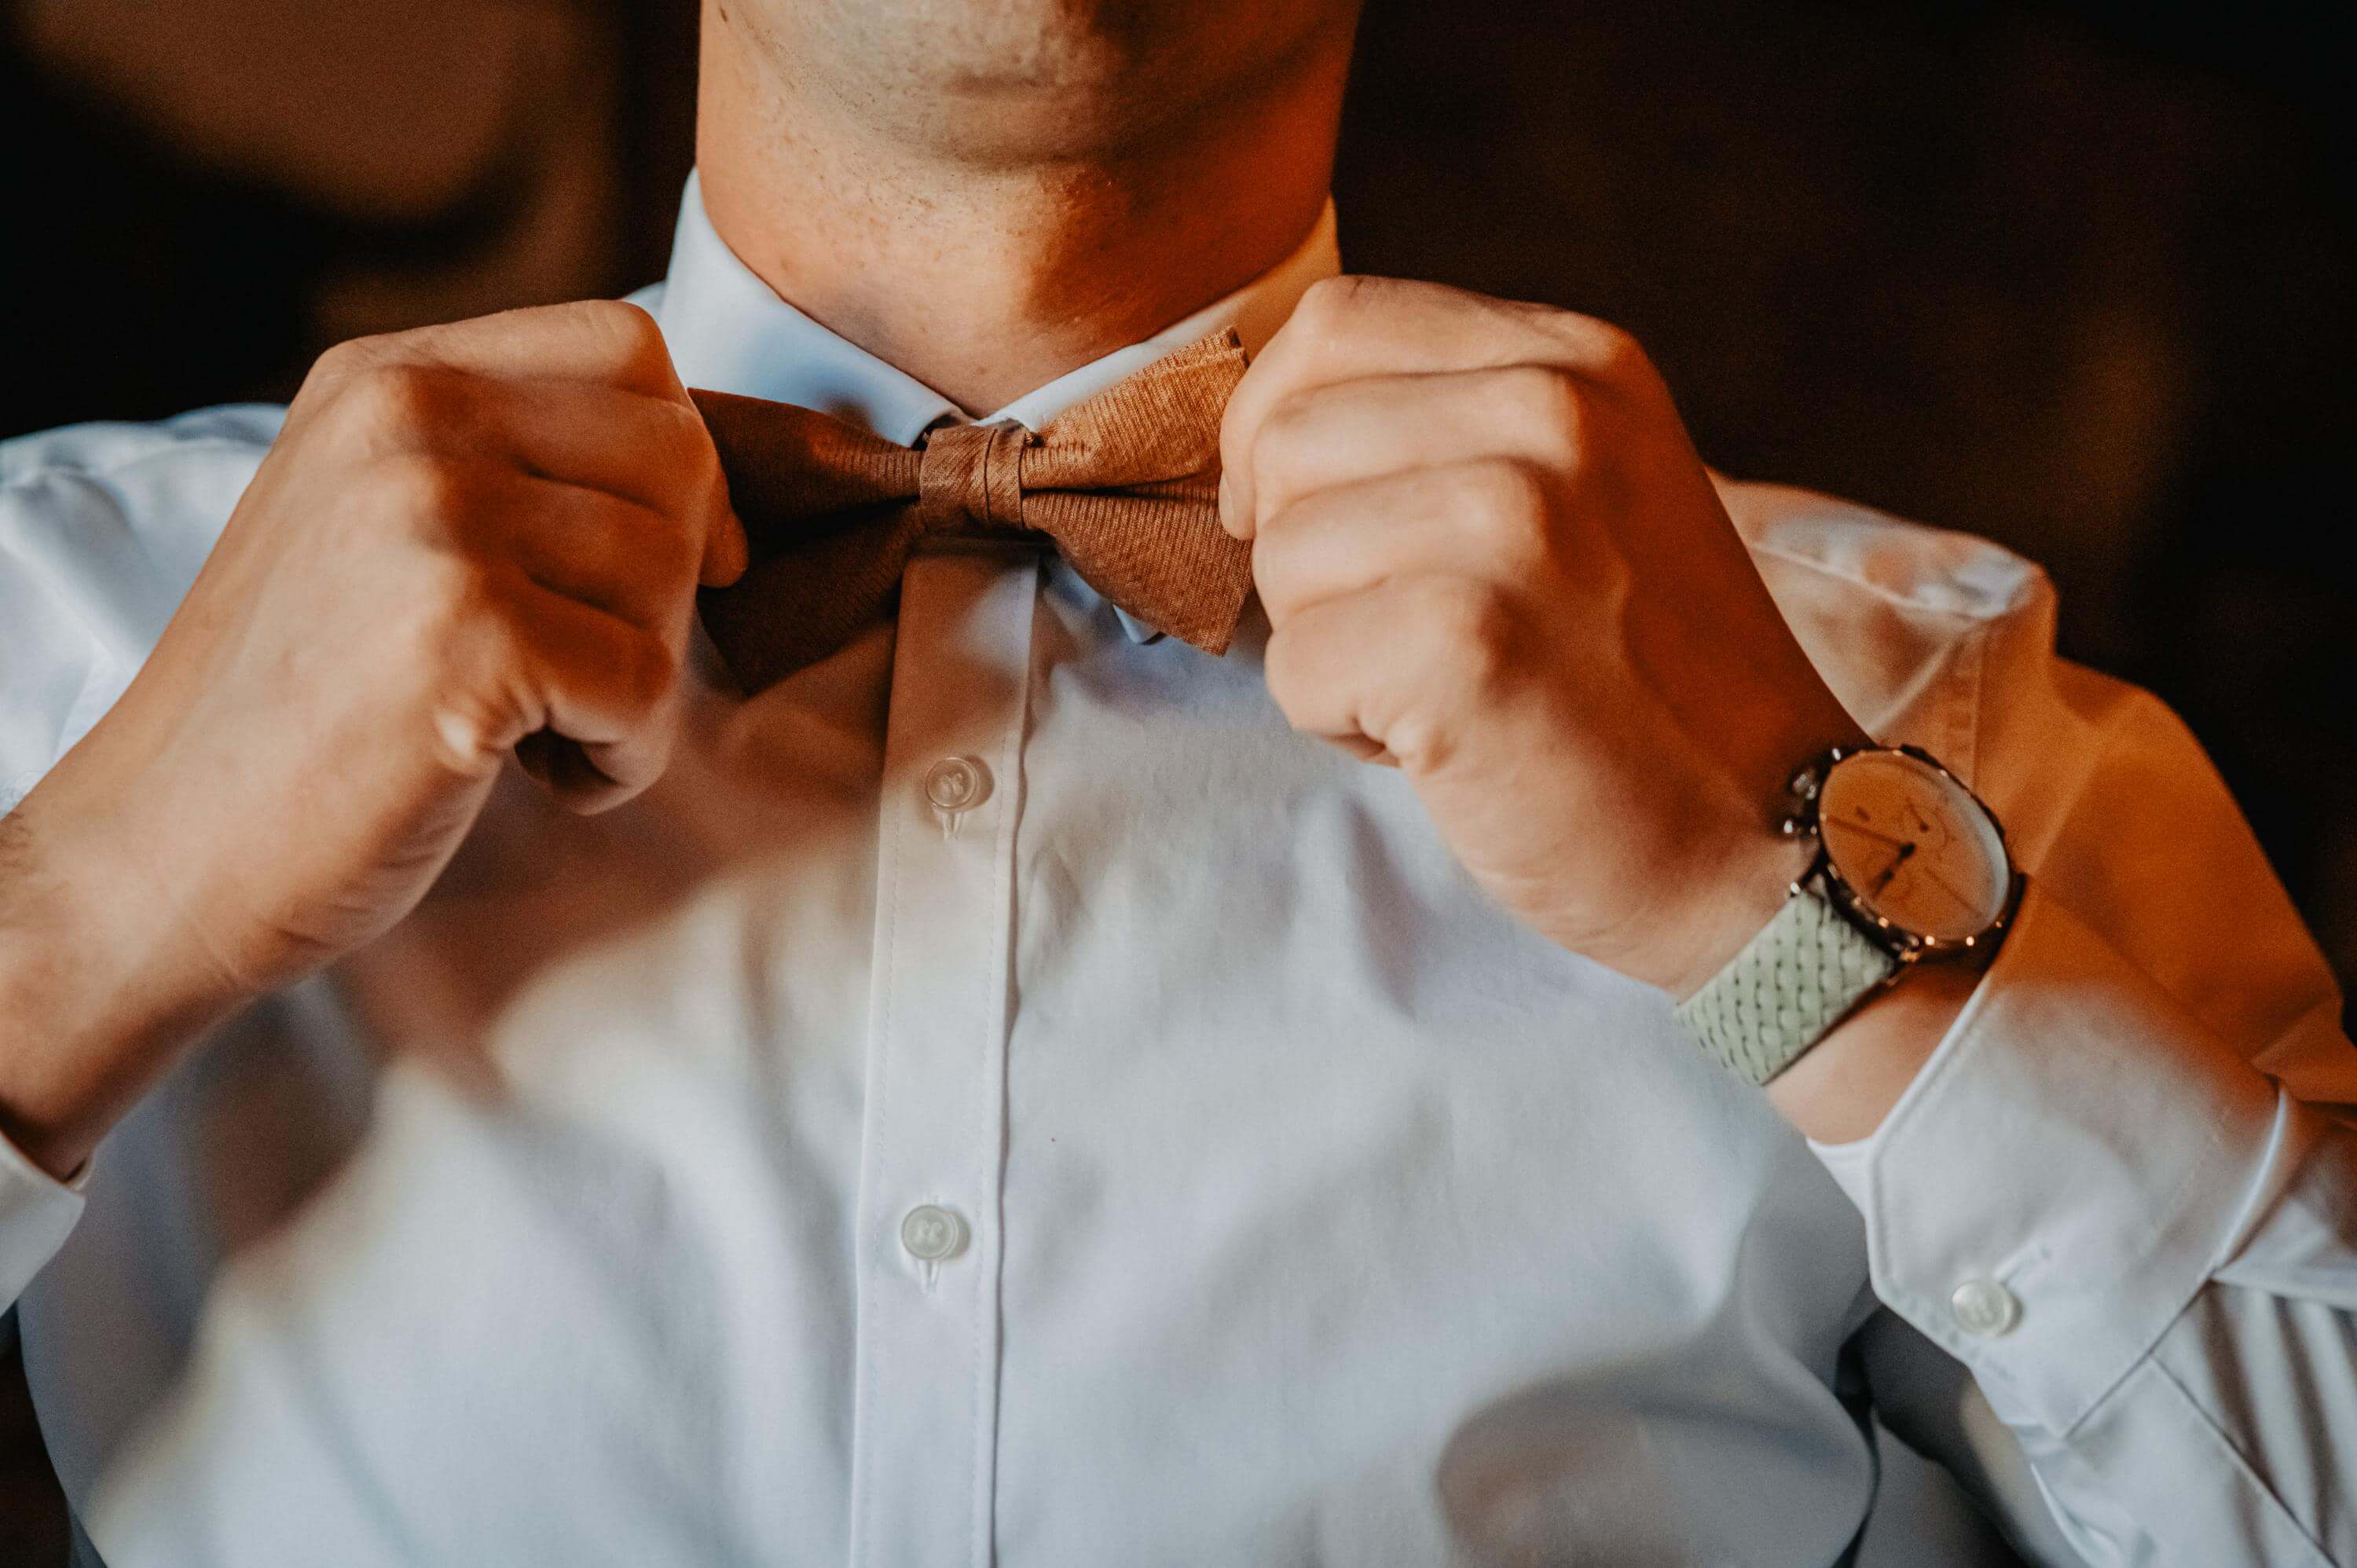 Classic close-up of the groom's torso in a white shirt and wristwatch while getting ready, straightening his bow tie on his neck with both hands.